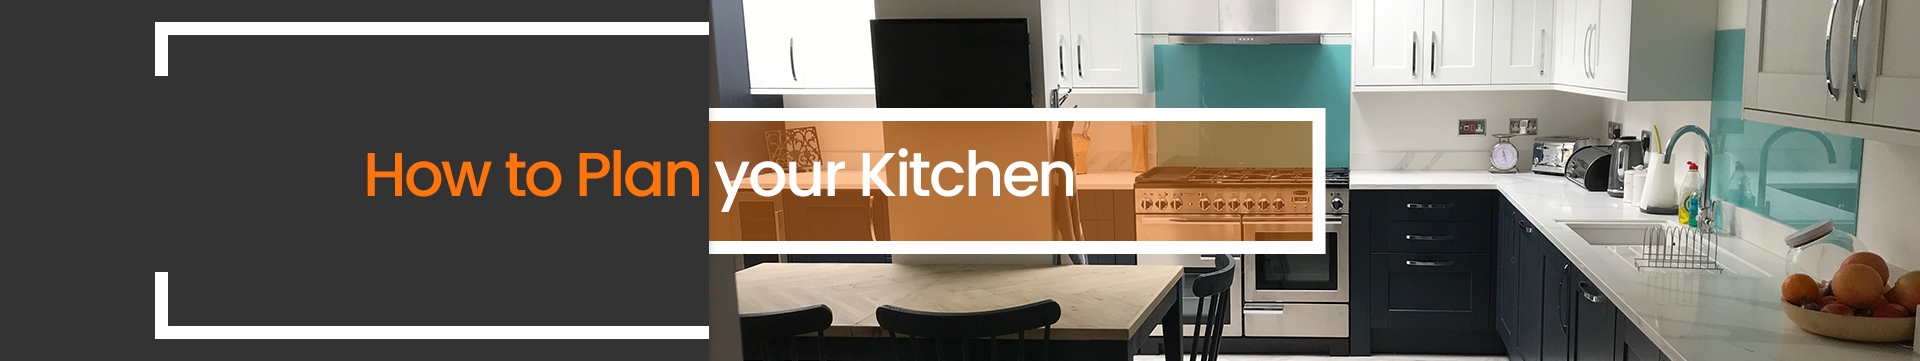 how to Plan your Kitchen banner 2 Facelift